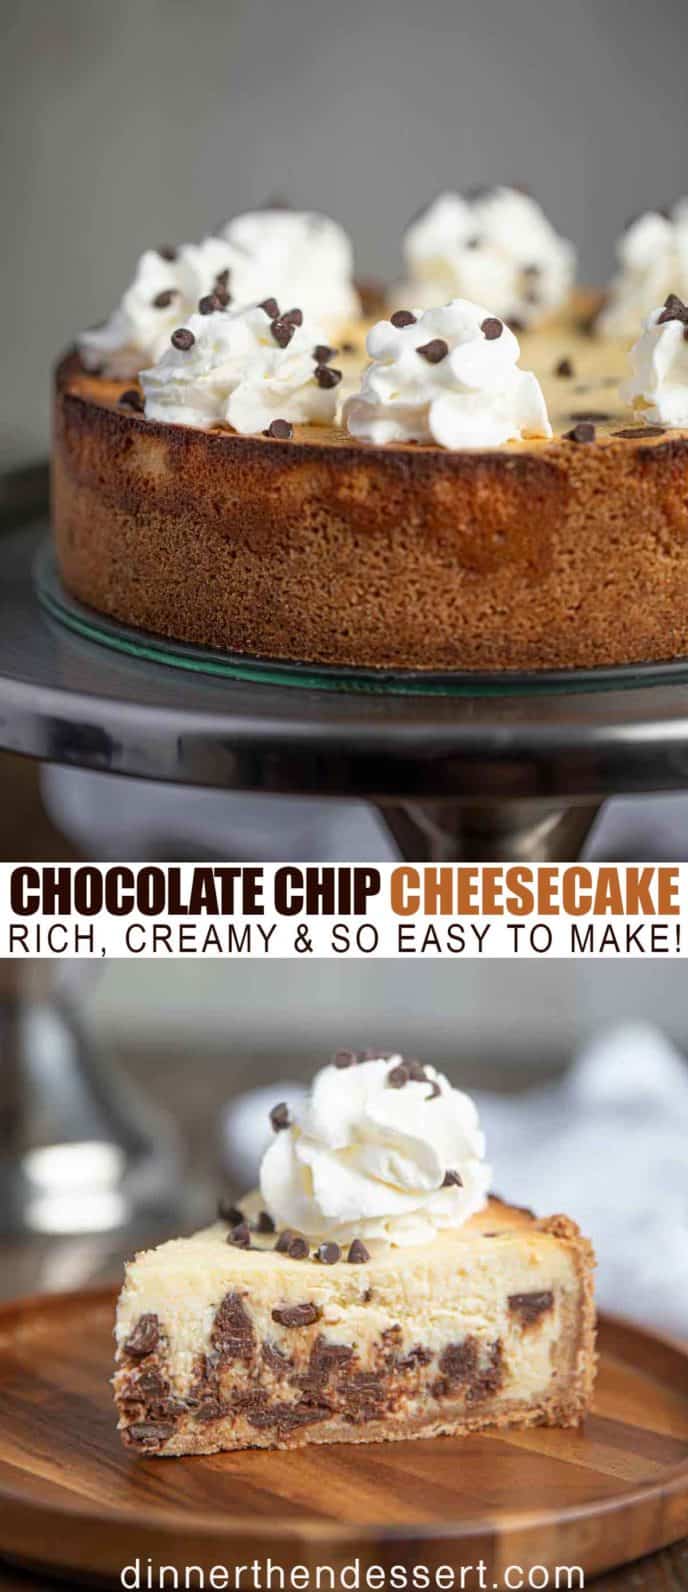 Chocolate Chip Cheesecake with whipped cream